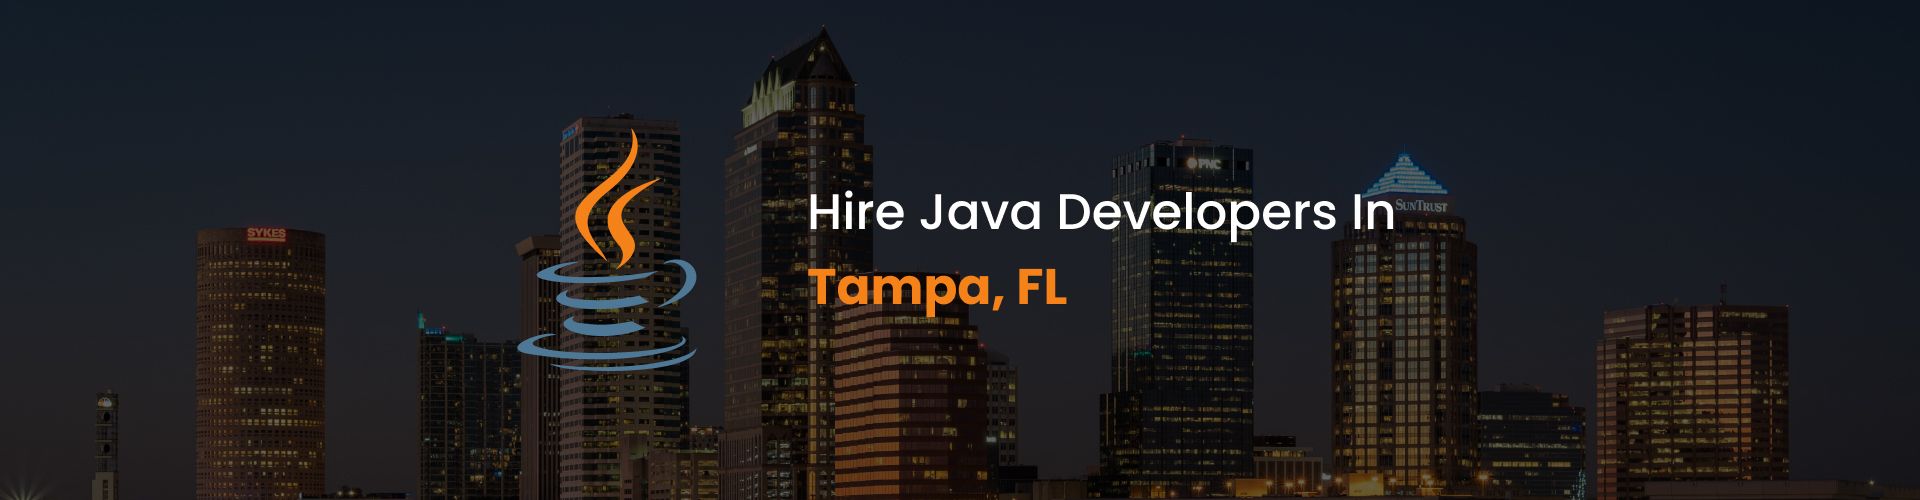 hire java developers in tampa, fl